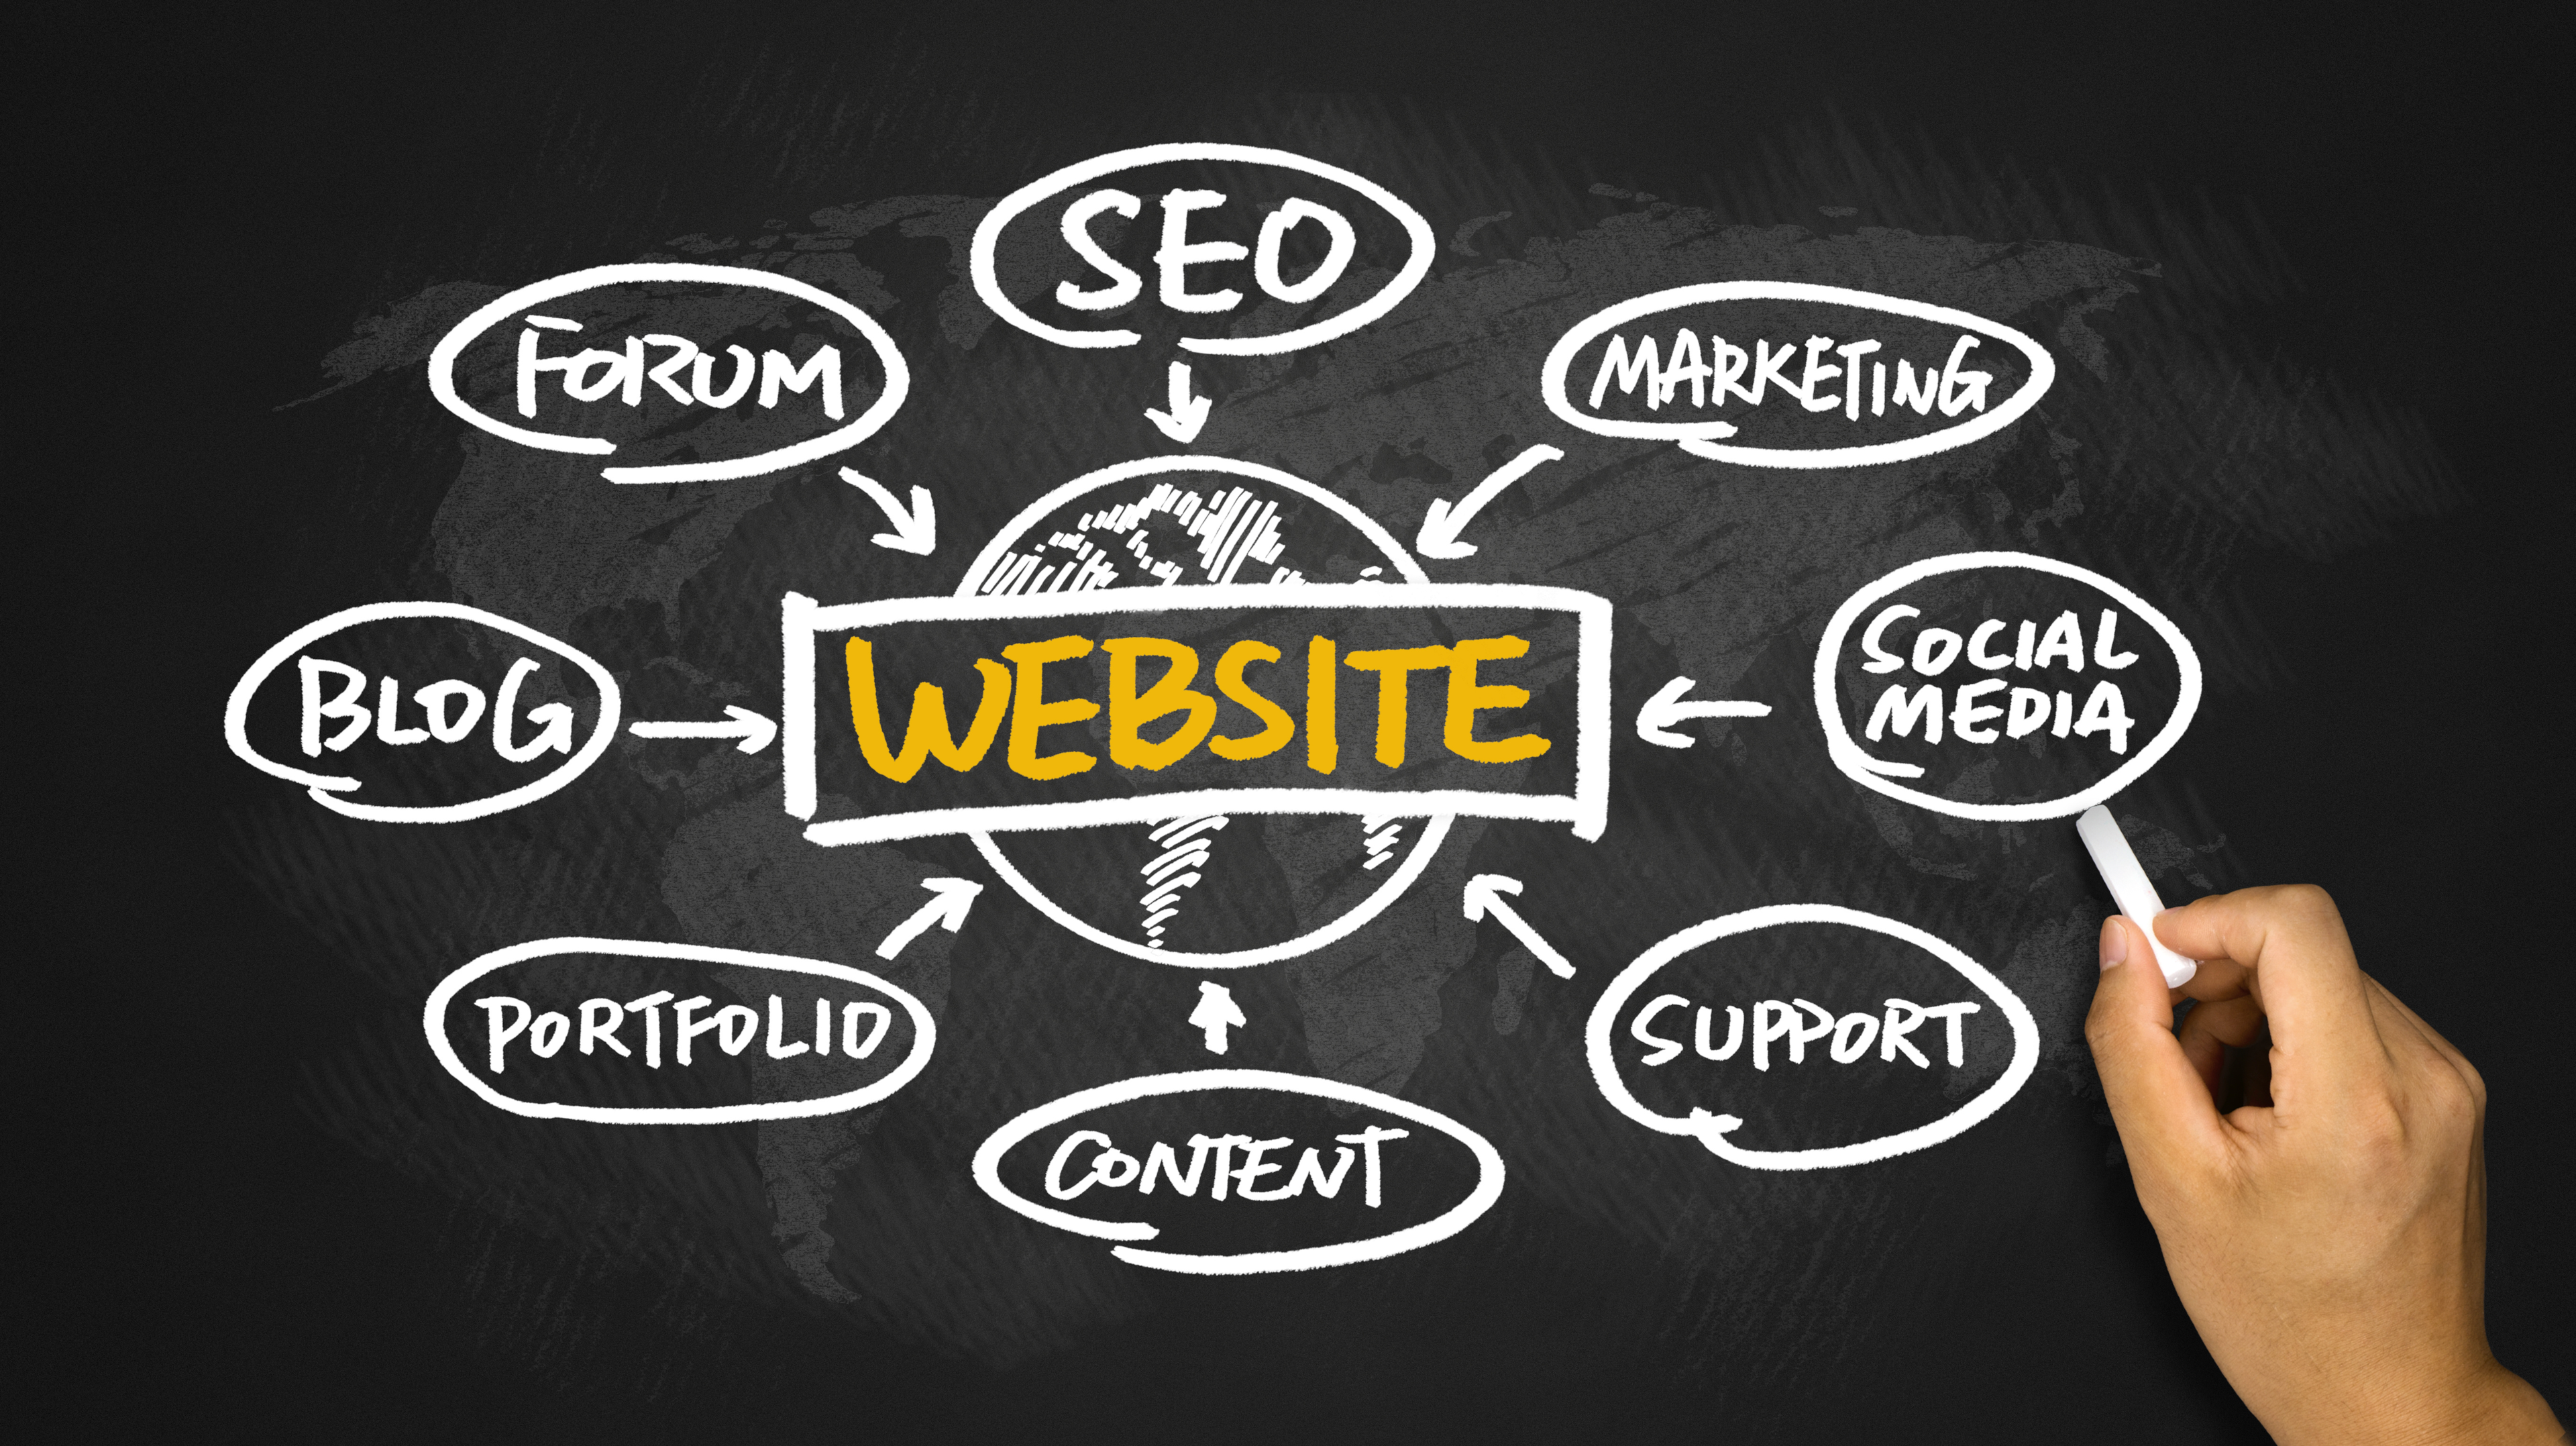 The are many different types of business website.